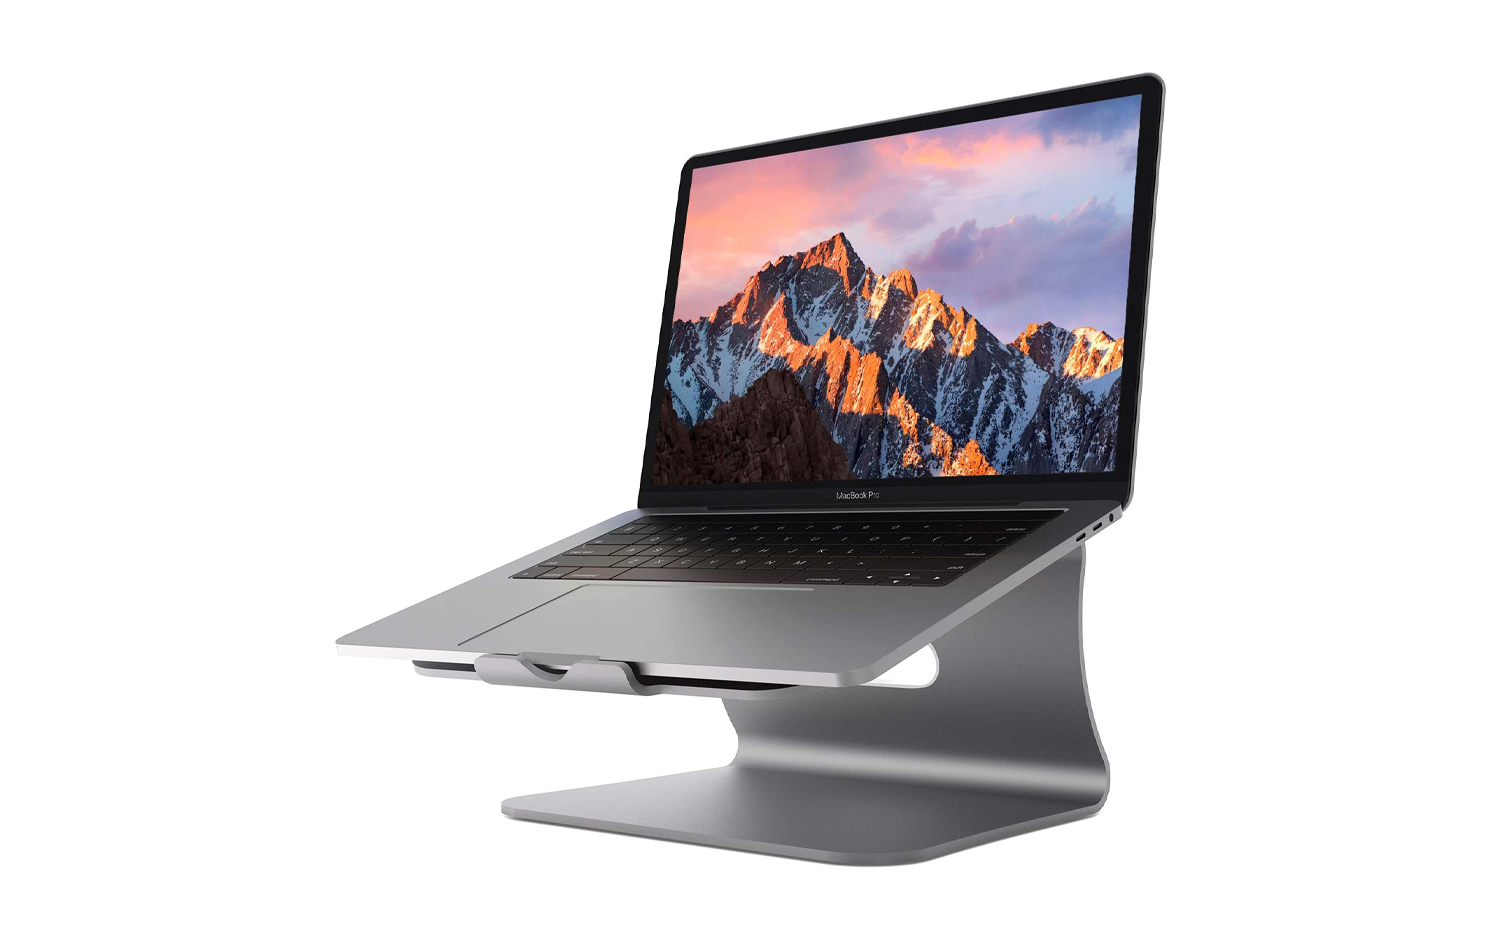 best back to school accessories for MacBook: Bestand Aluminum Cooling Stand against a white background